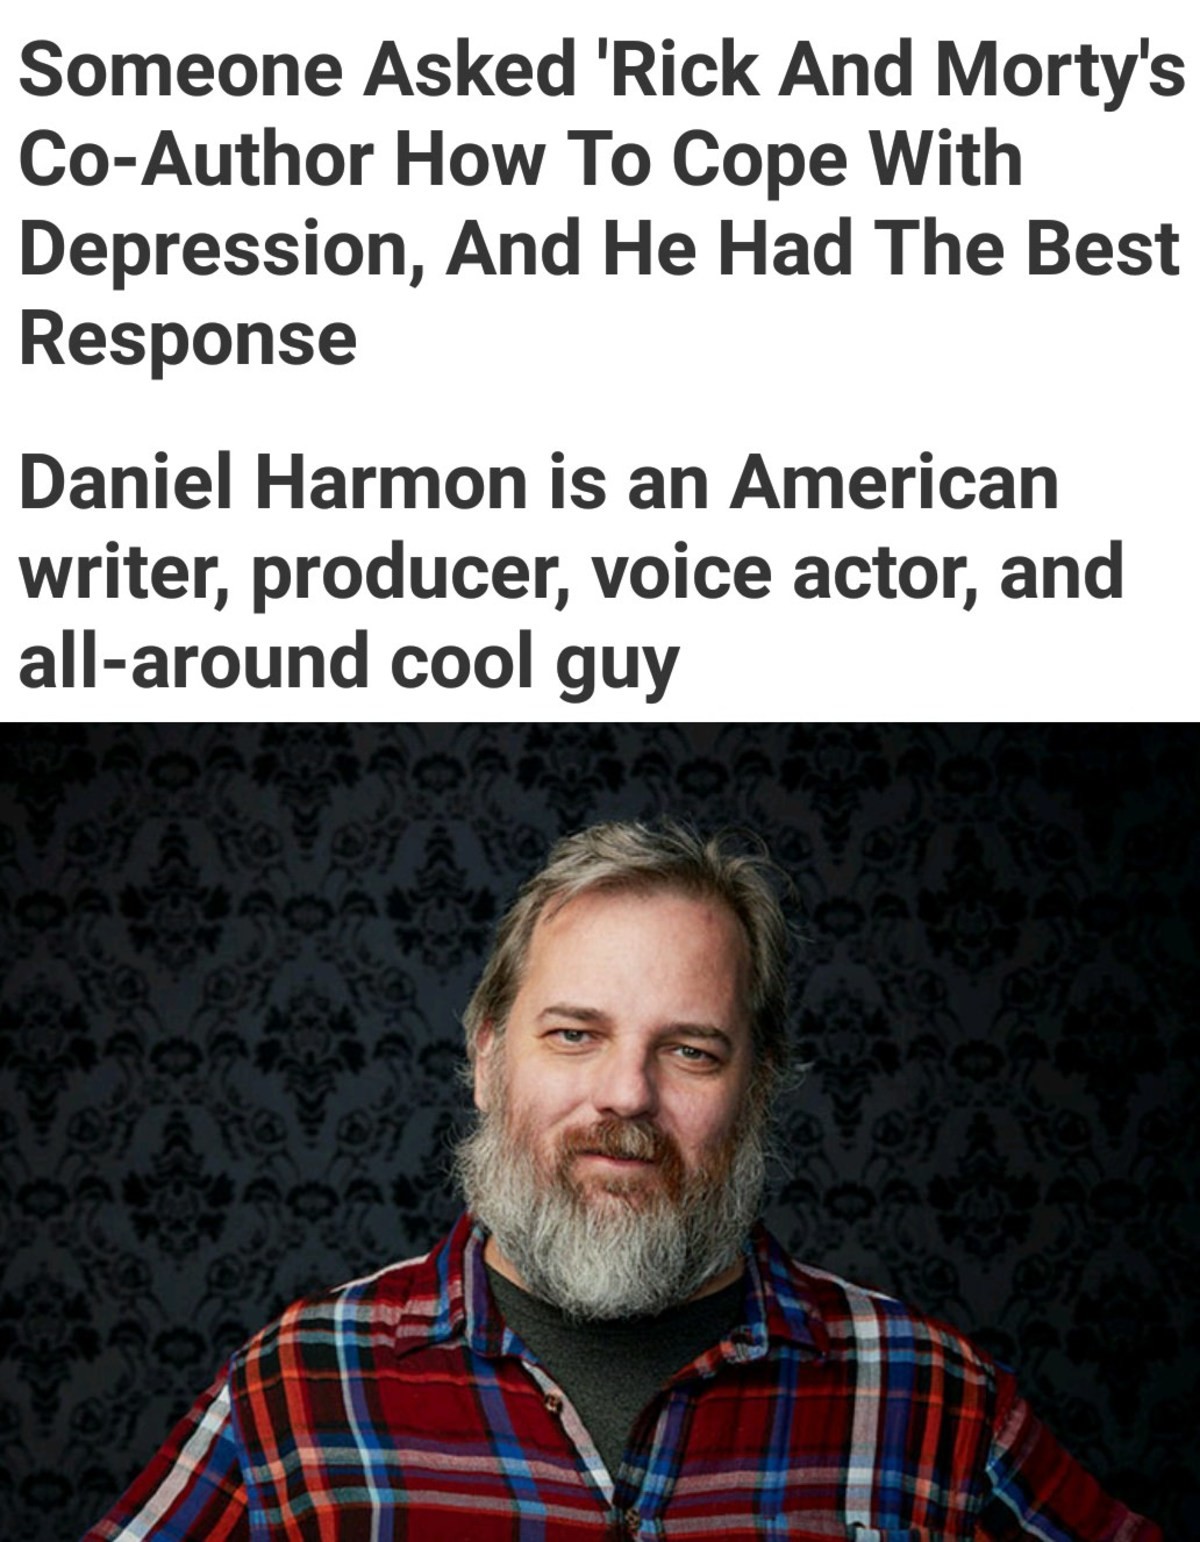 Help. . How To 's'' With Response Daniel Harmon is 'gilr ? tr writer, producer, voice actor, lla, tiltle,He' s the creator of popular show Rick and Marty A fan 